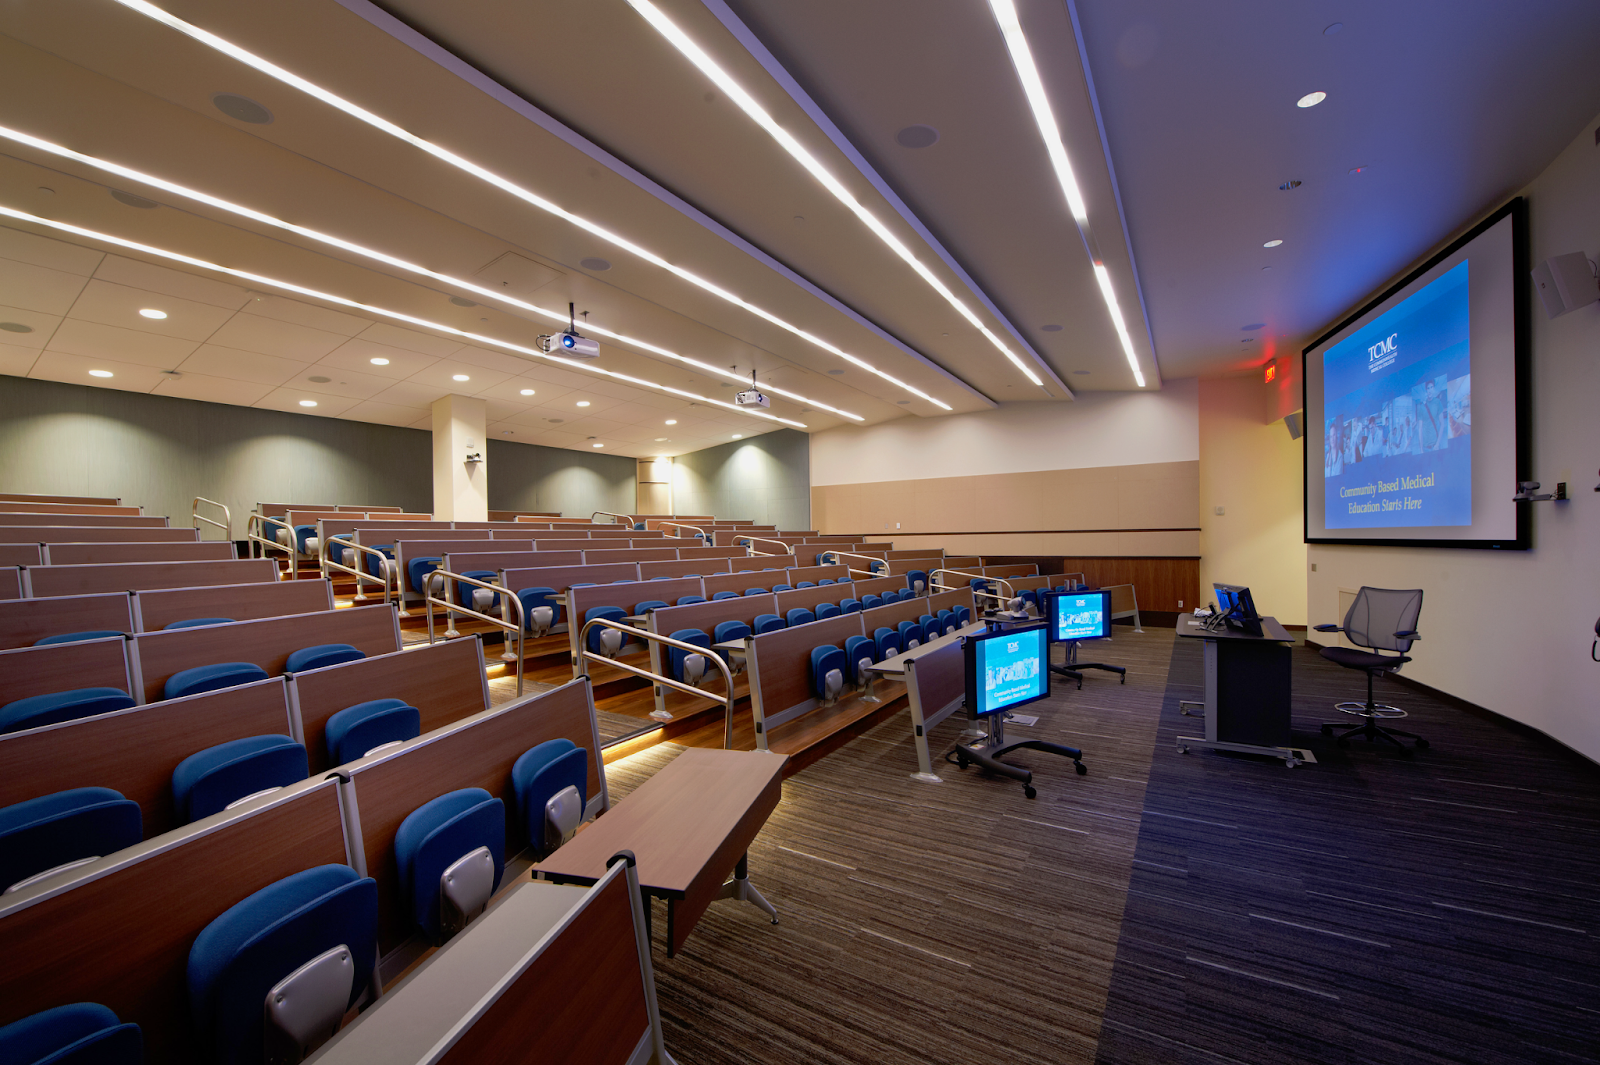 A modern lecture hall with rows of seats and large screens on the walls, where Geisinger Commonwealth School of Medicine students are attending a lecture.